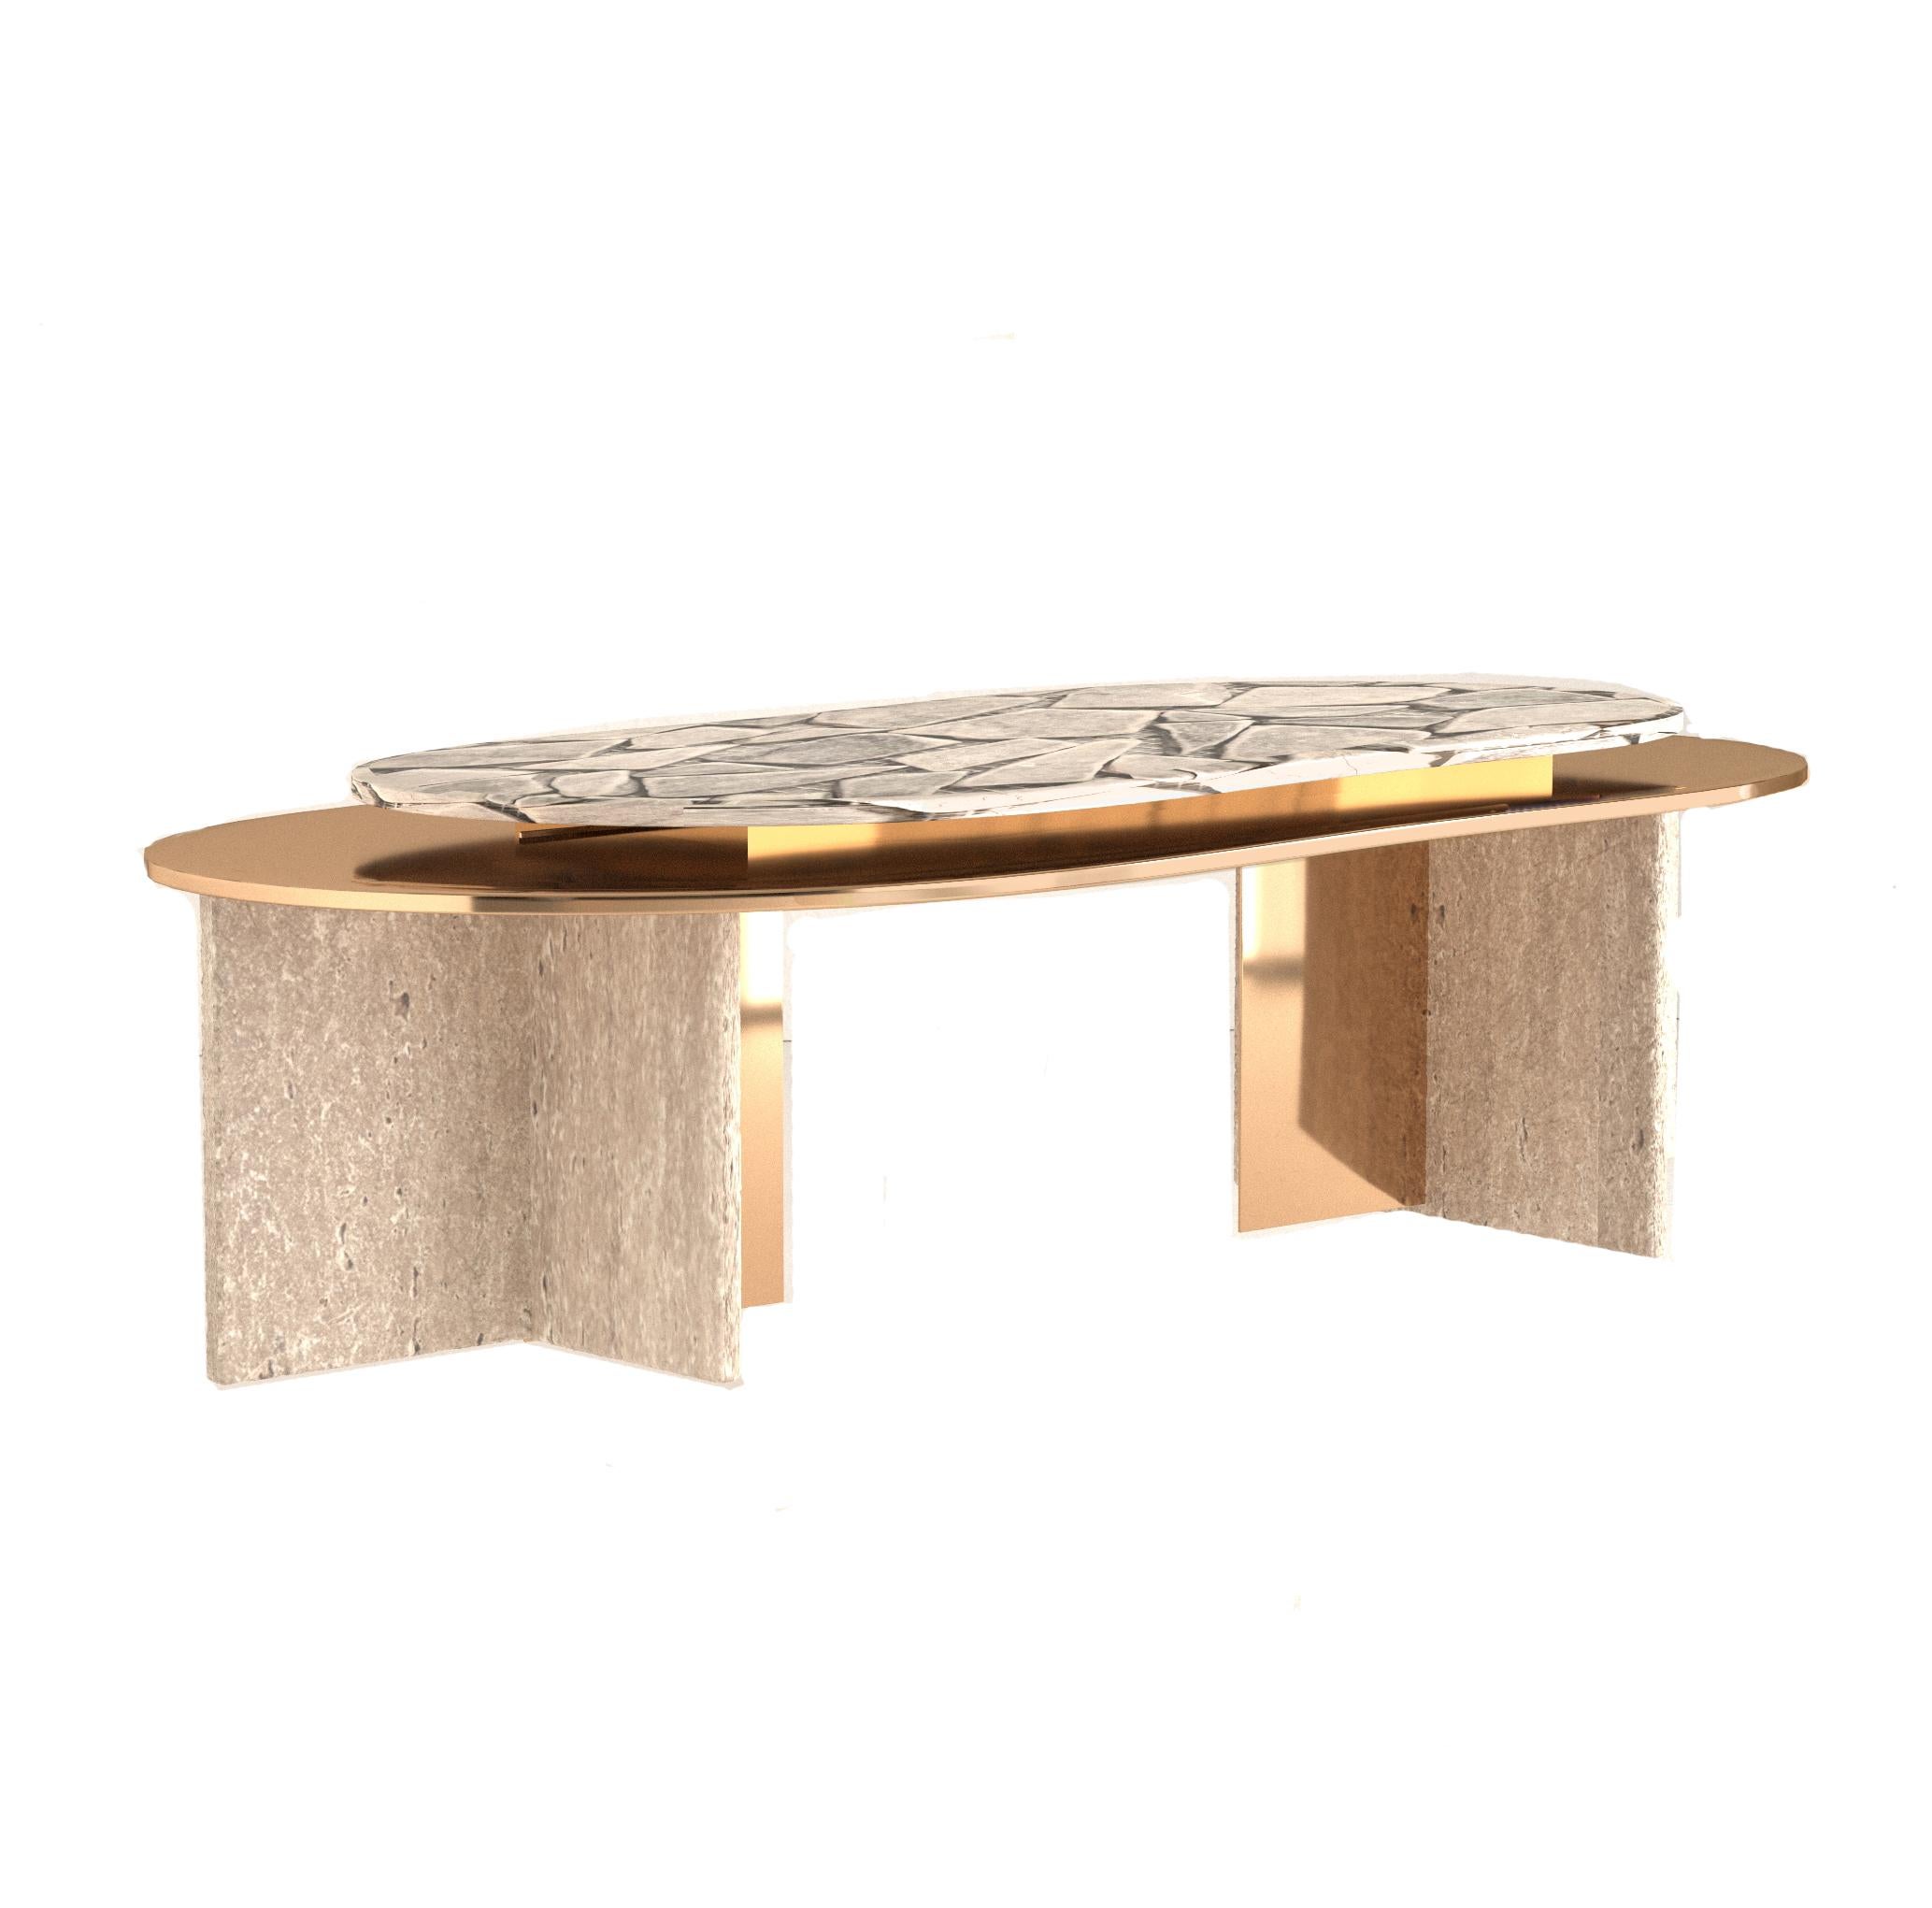 About
Contemporary Polished Brass and Travertine Coffee Table by Alter Ego Studio

Shift Rock Coffee Table from Stone Collection
Design by Alter Ego Studio exclusively for October Gallery
Customizable Coffee Table
Materials: Brass, Travertine,